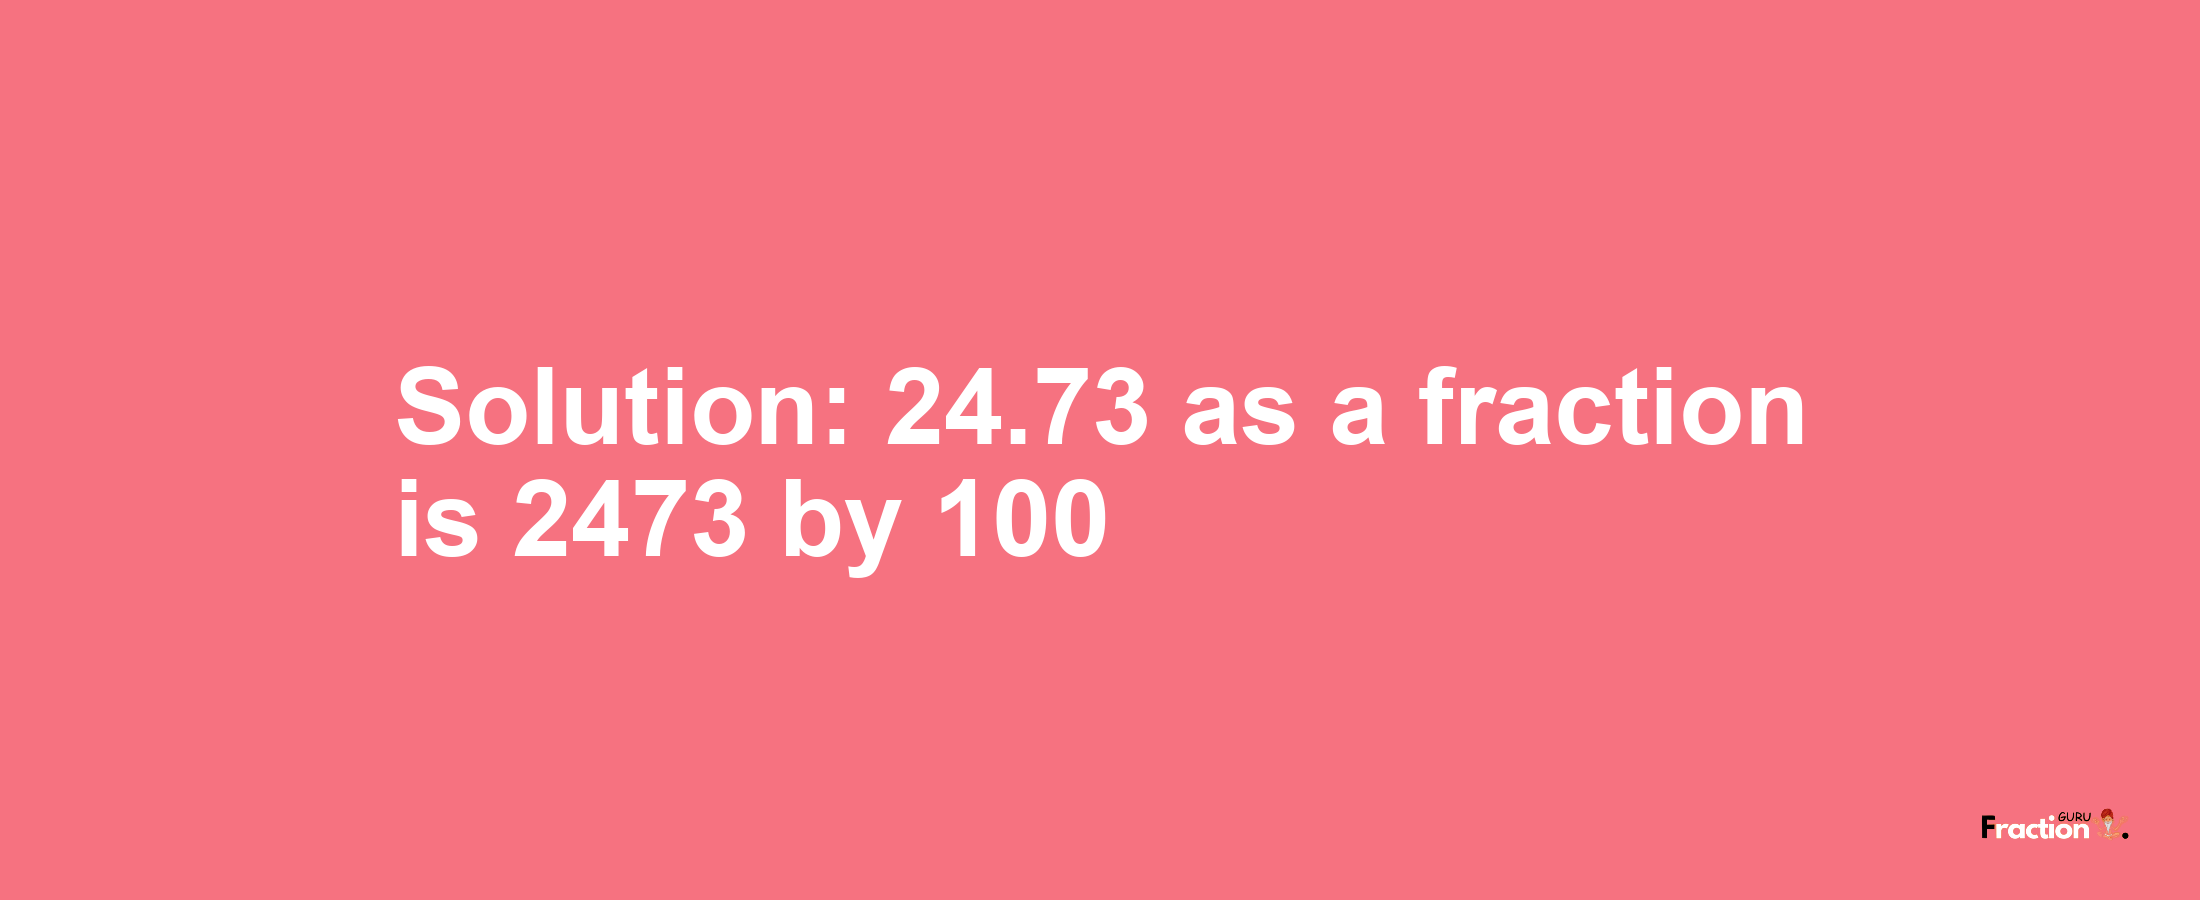 Solution:24.73 as a fraction is 2473/100